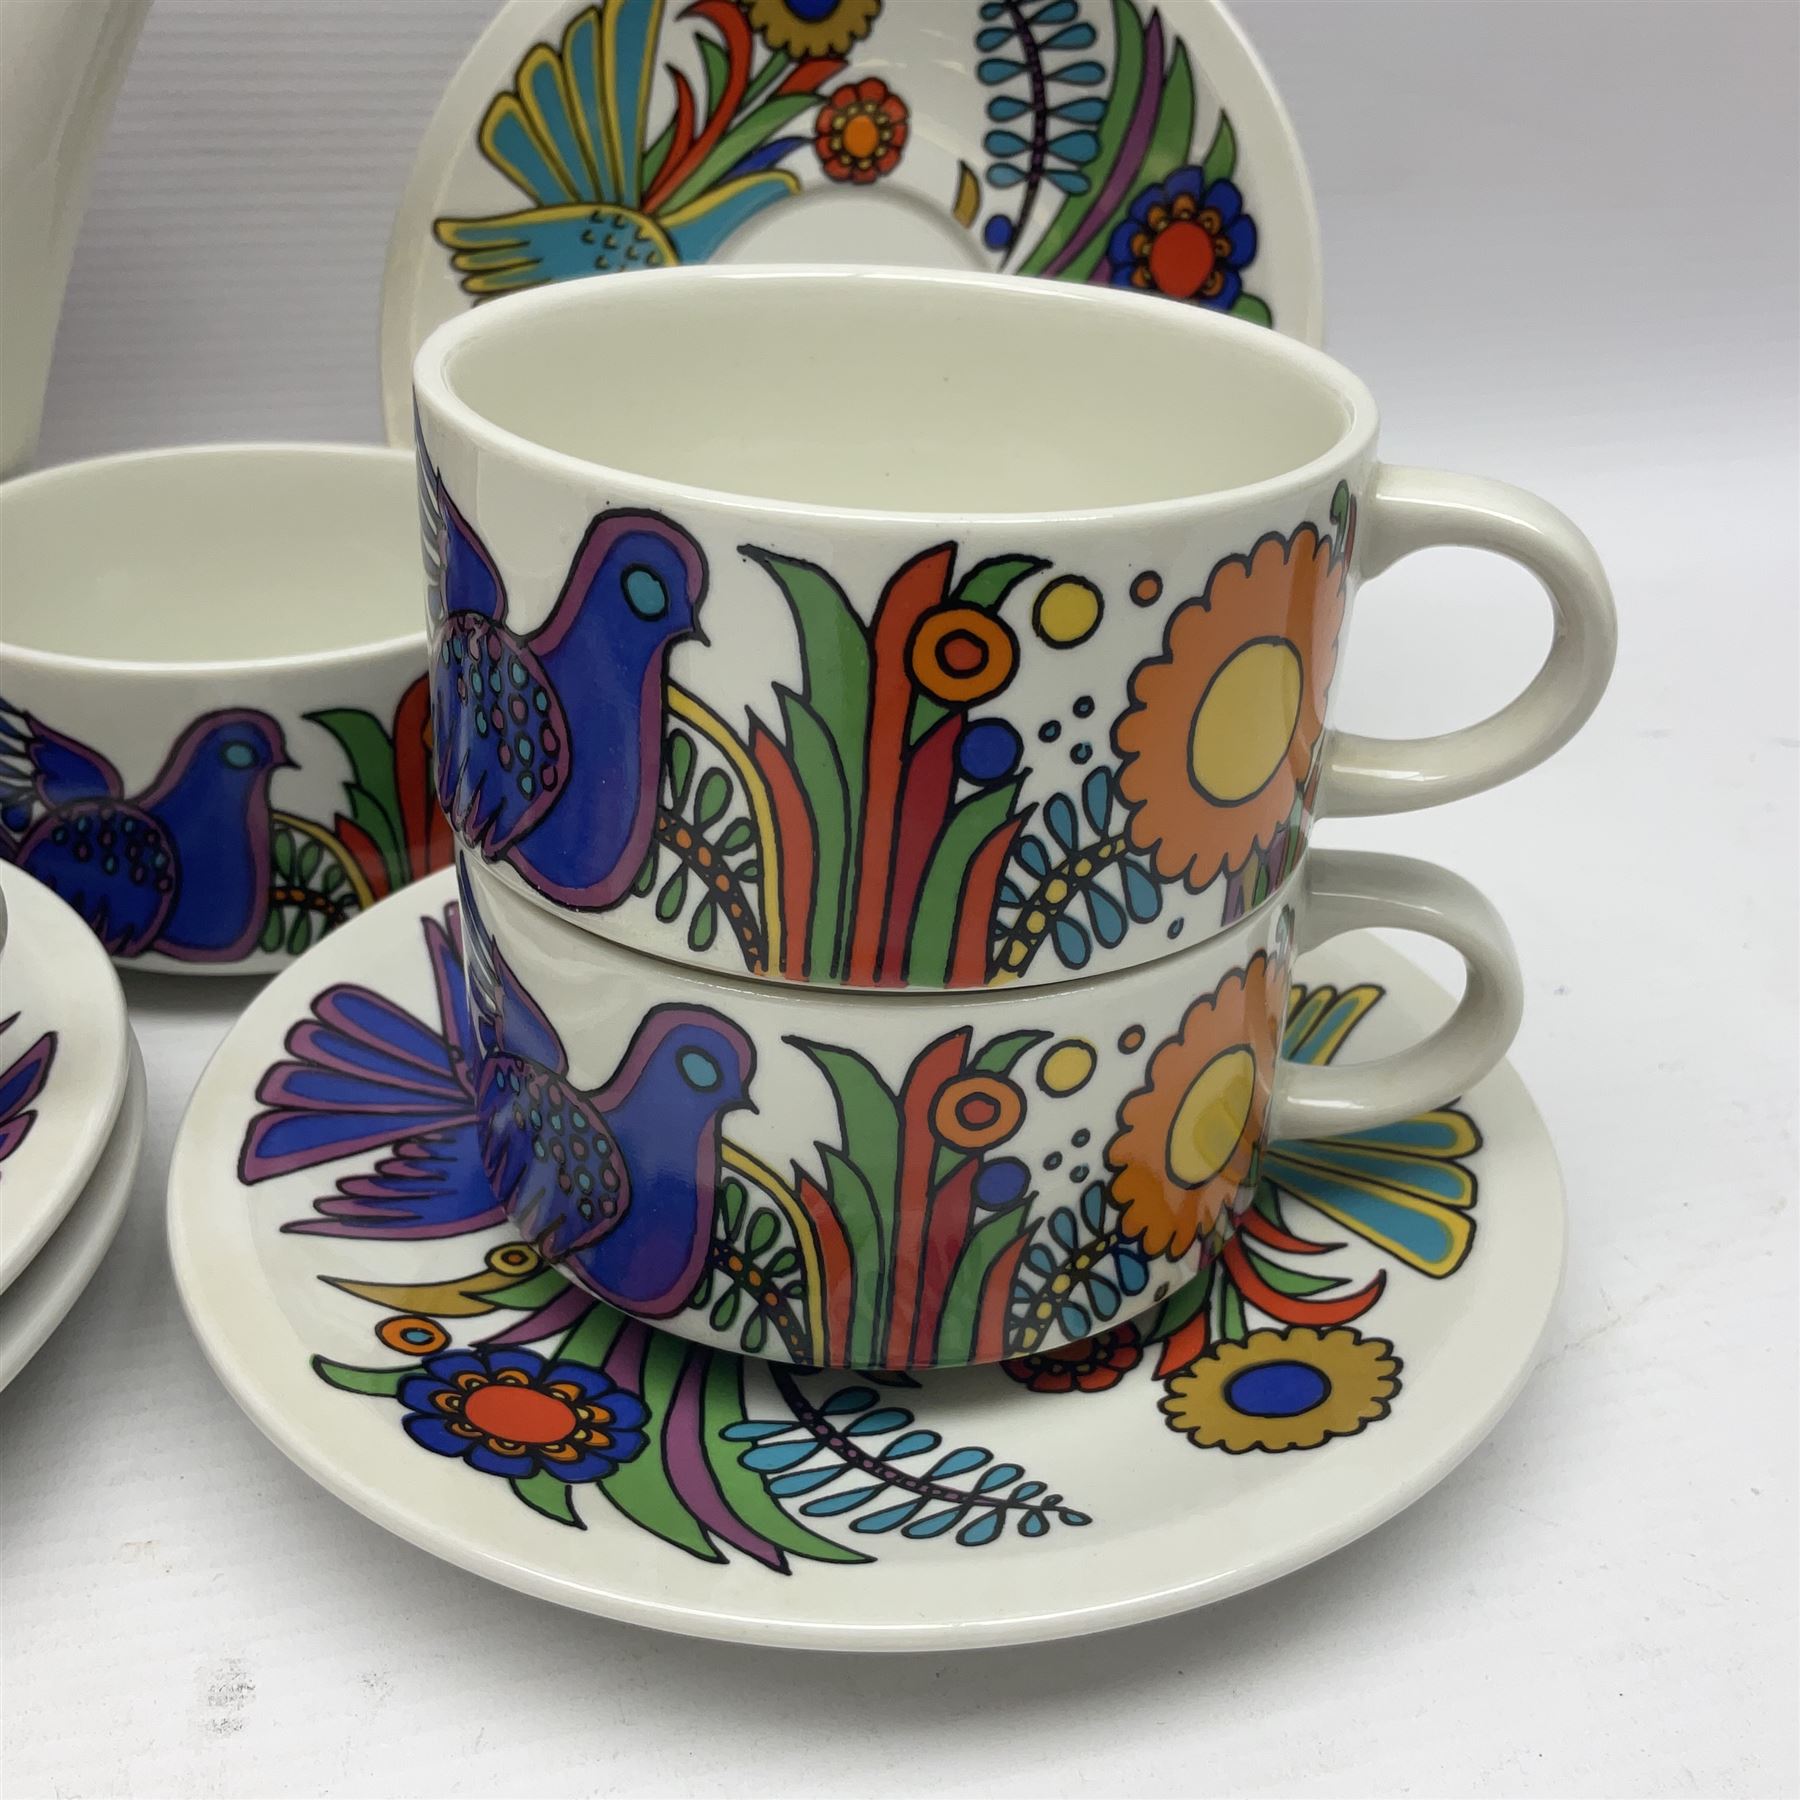 Villeroy & Boch Acapulco pattern coffee set for six - Image 7 of 15